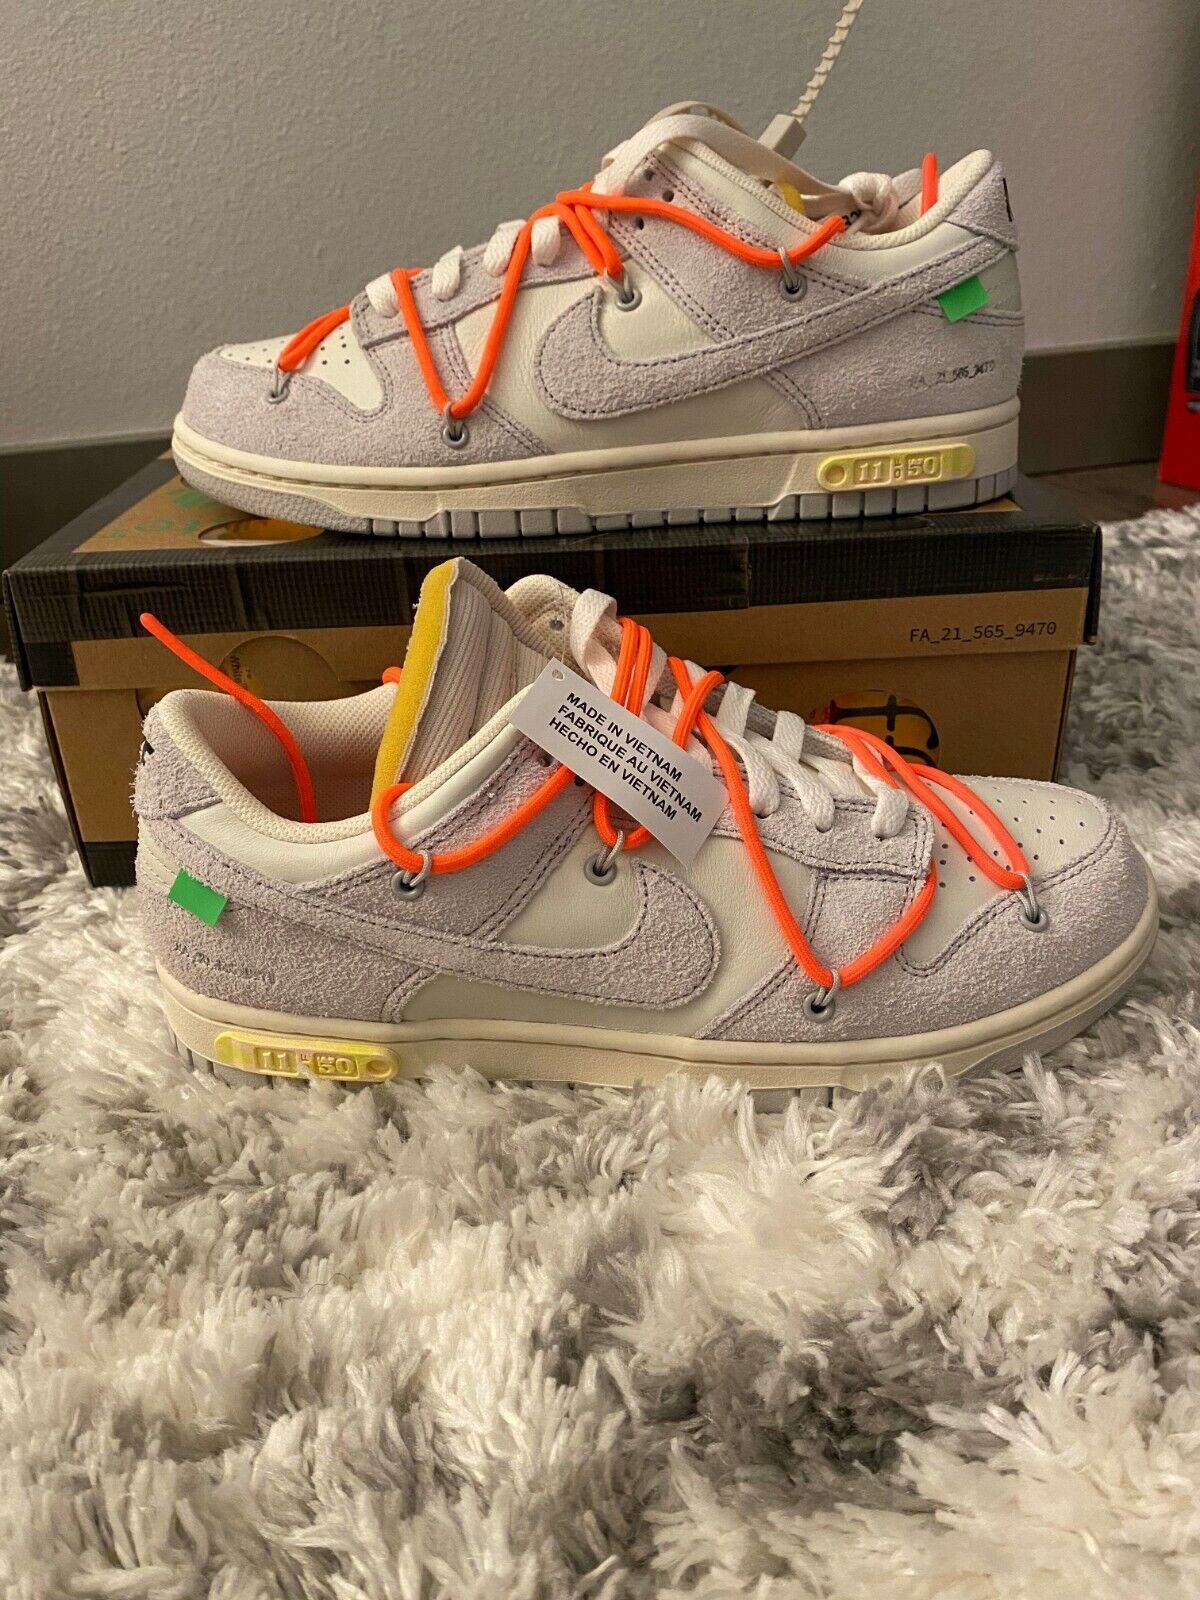 Size 8.5 - Nike Dunk Low x Off-White Lot 11 of 50 Sail/Neutral 